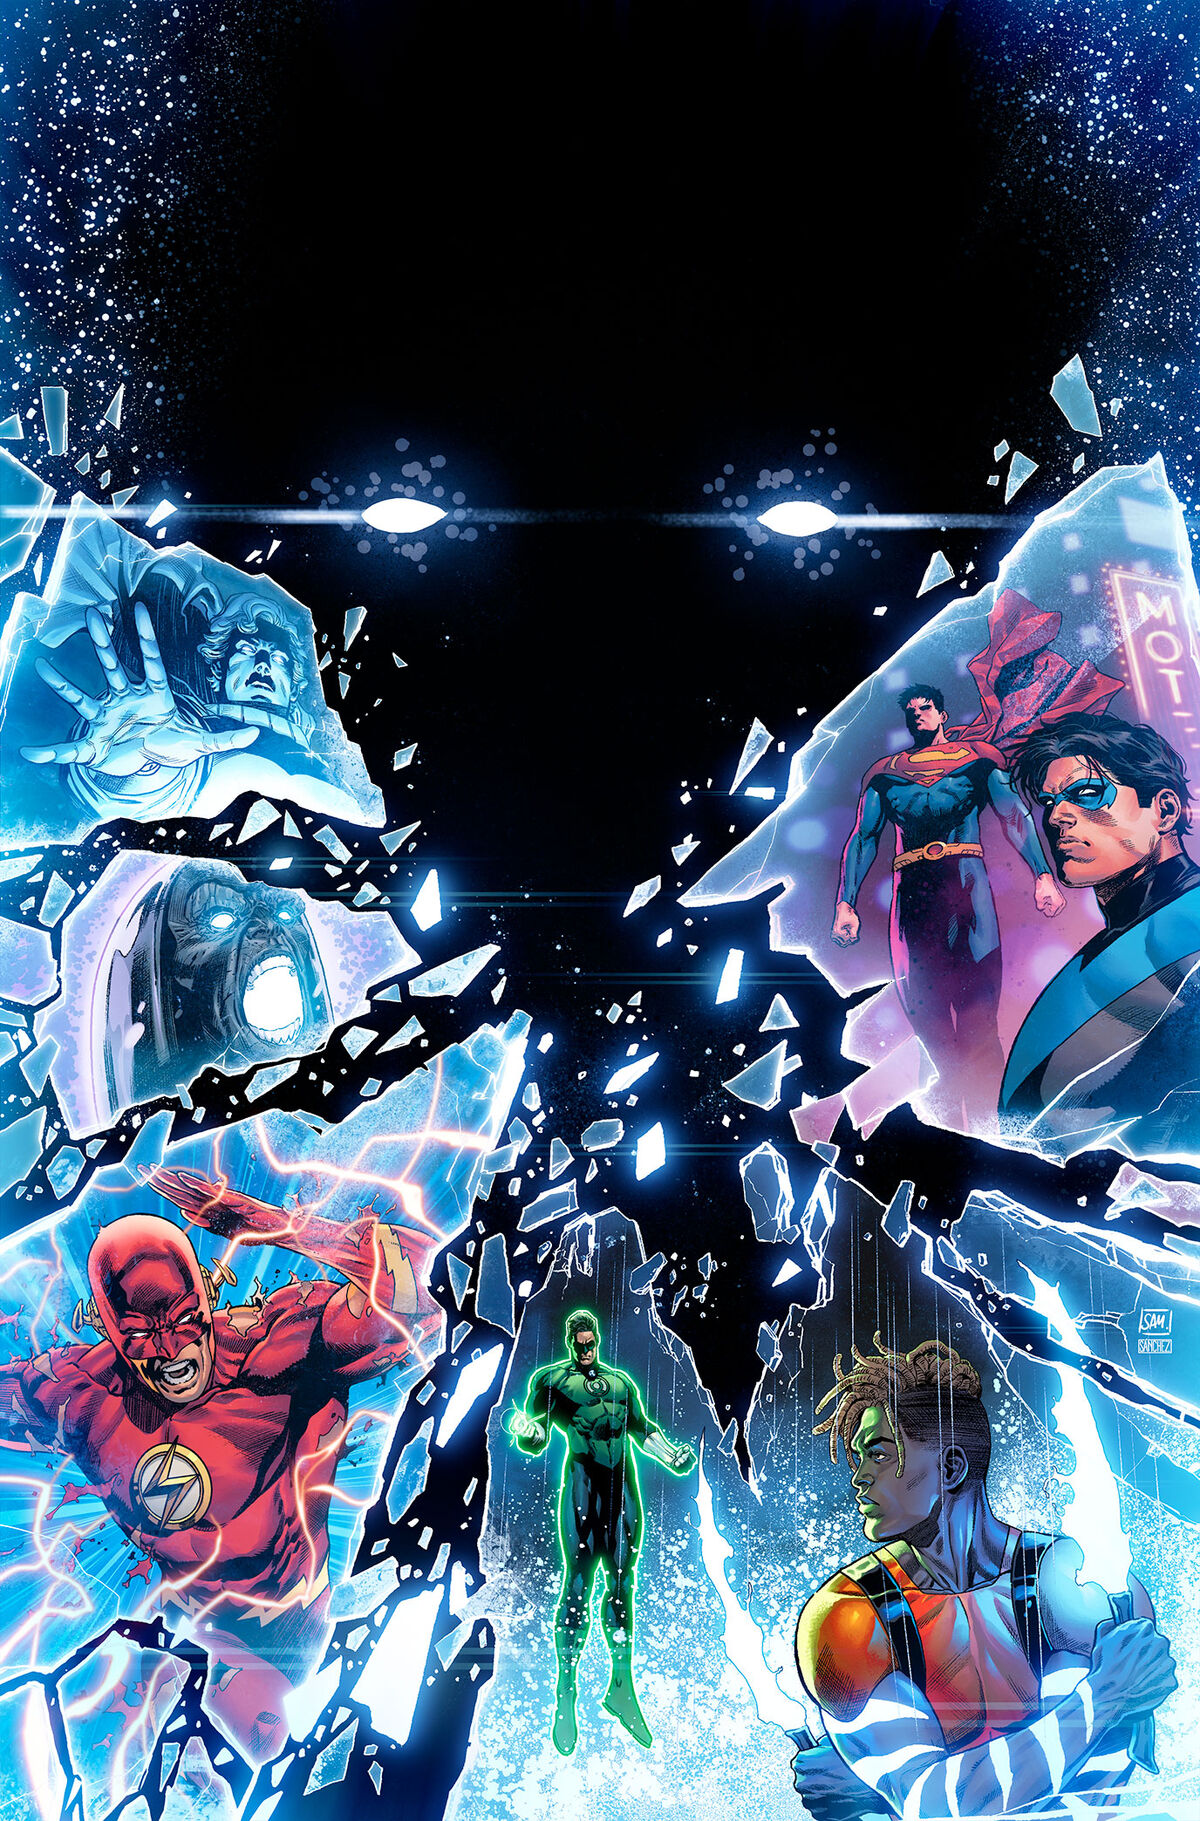 Dark Crisis - what DC superteams can replace the dead Justice